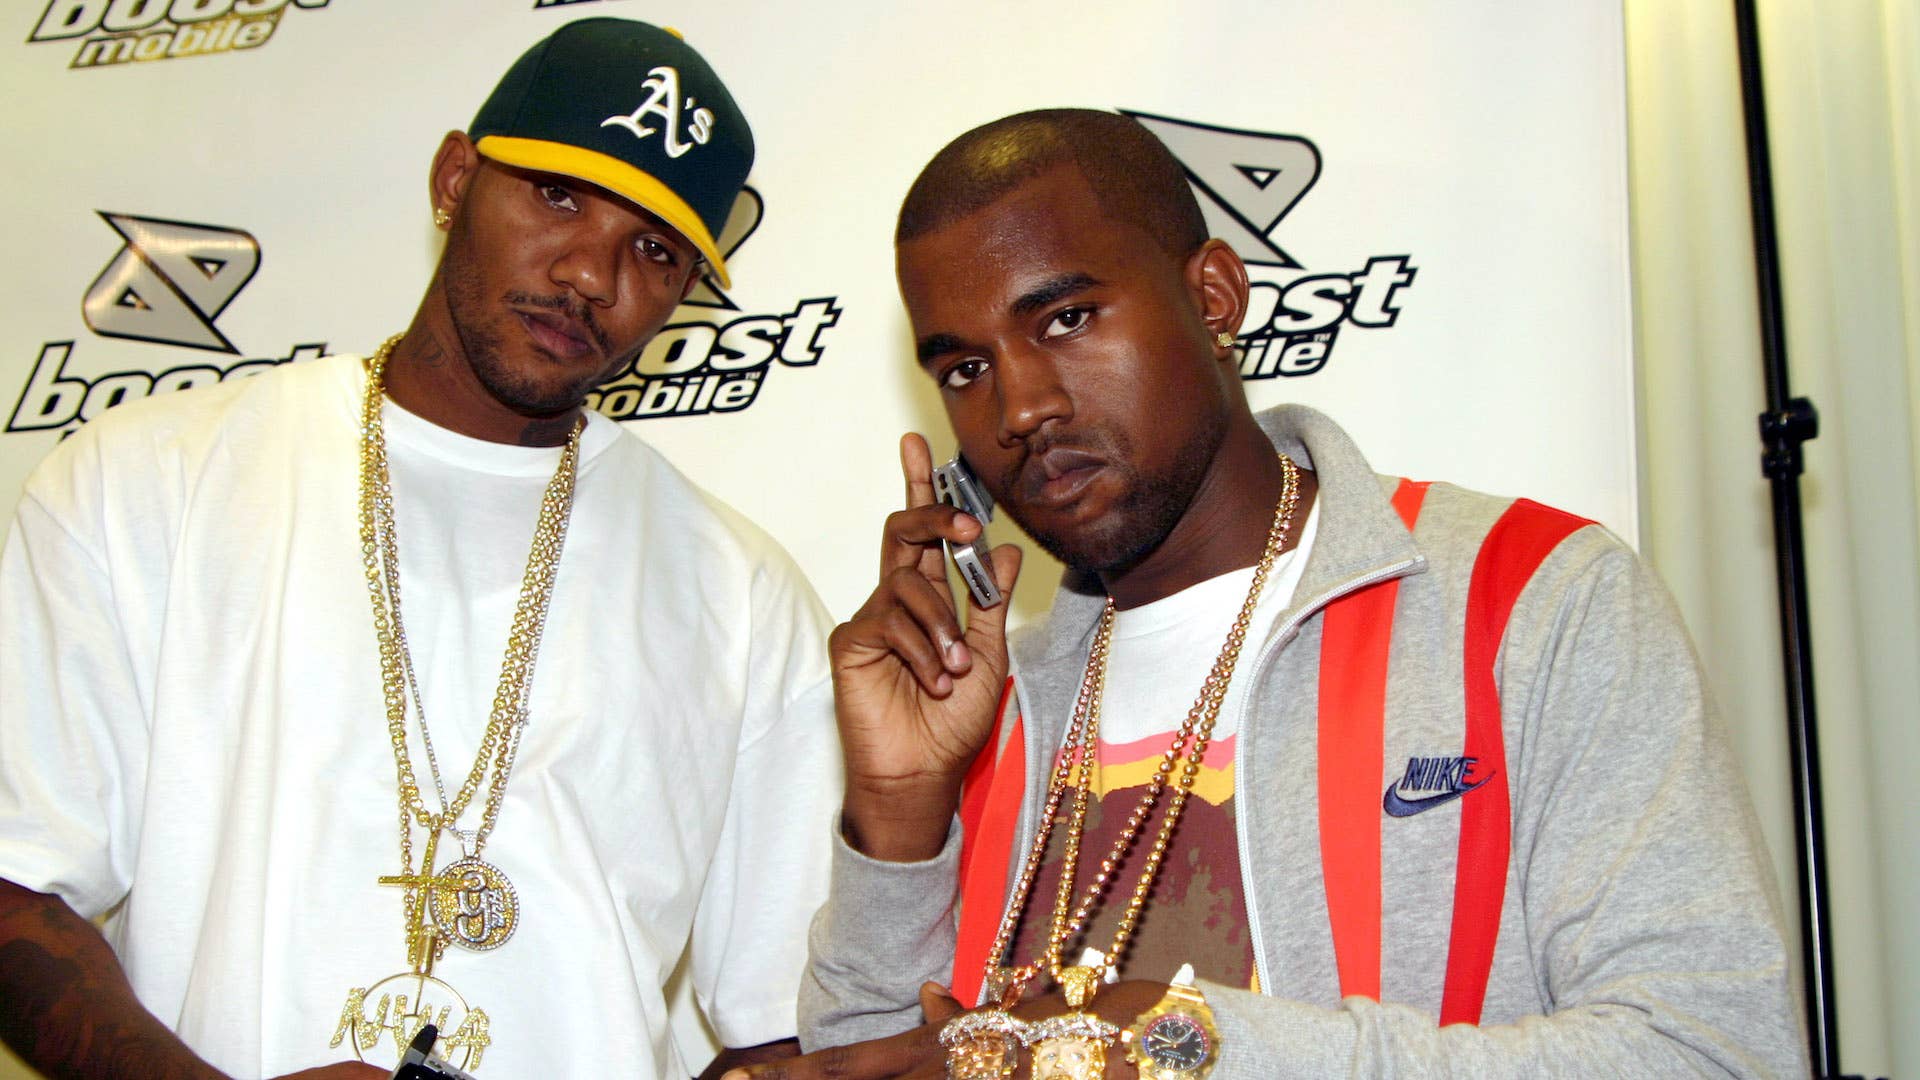 Kanye West and The Game share new song.